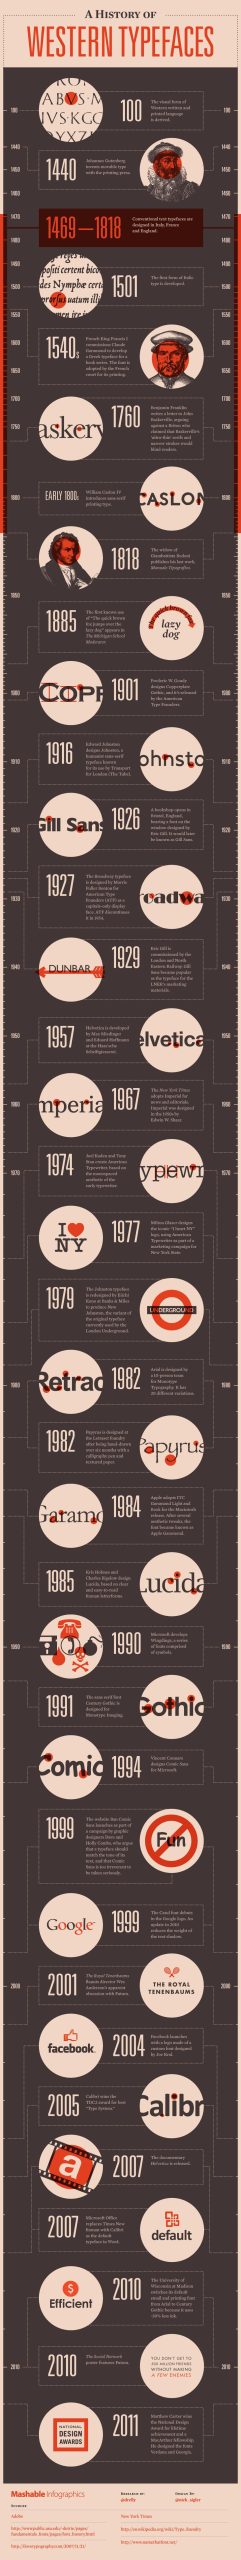 A History of Western Typefaces [INFOGRAPHIC]